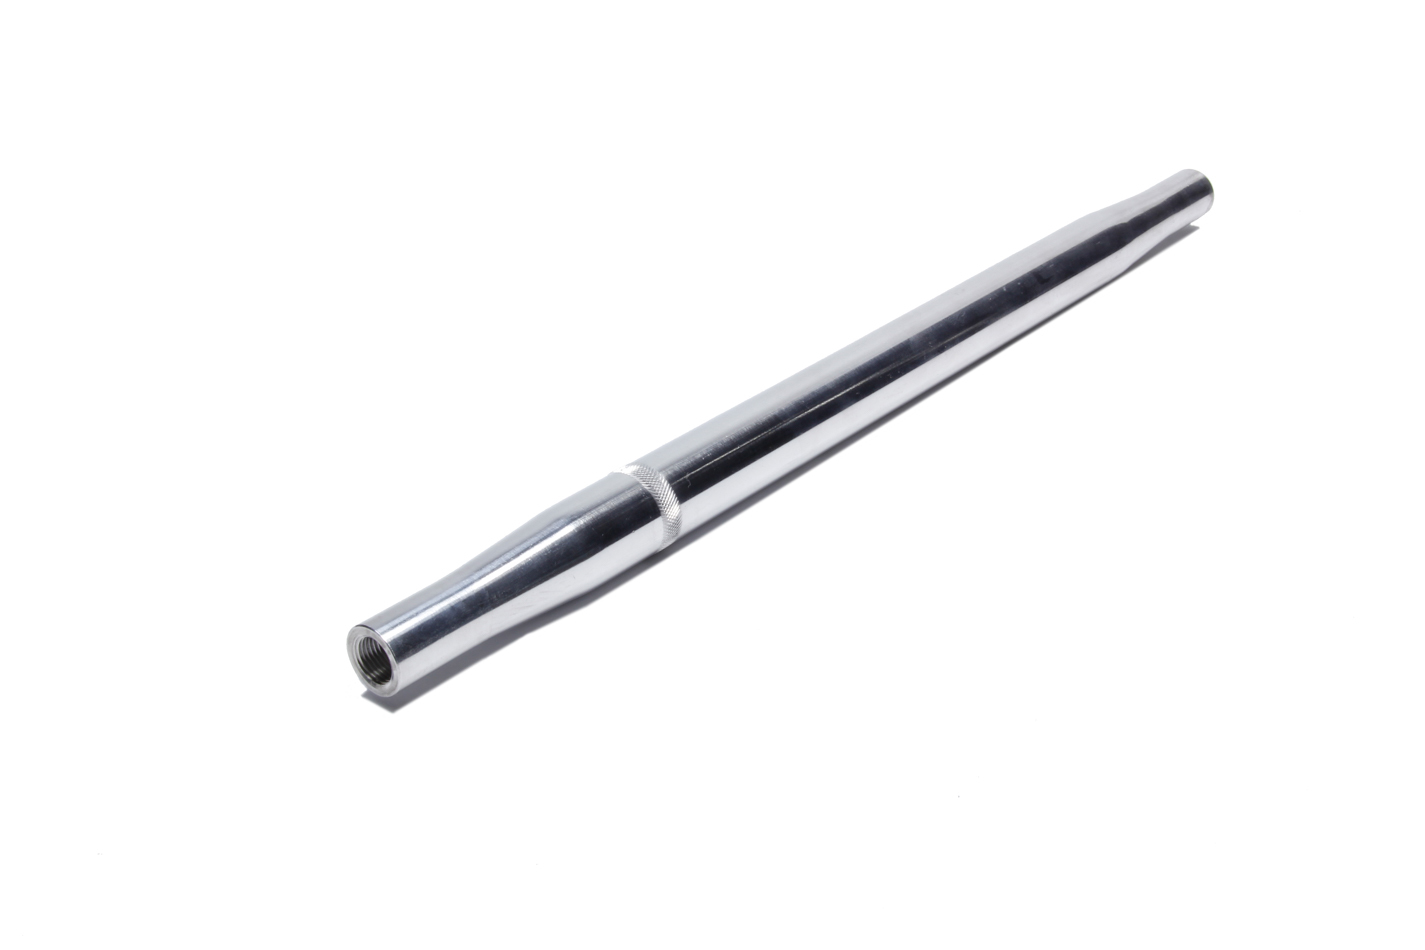 M AND W ALUMINUM PRODUCTS Swaged Rod 1.125in. x 23in. 5/8in. Thread P/N - SR-23L-POL